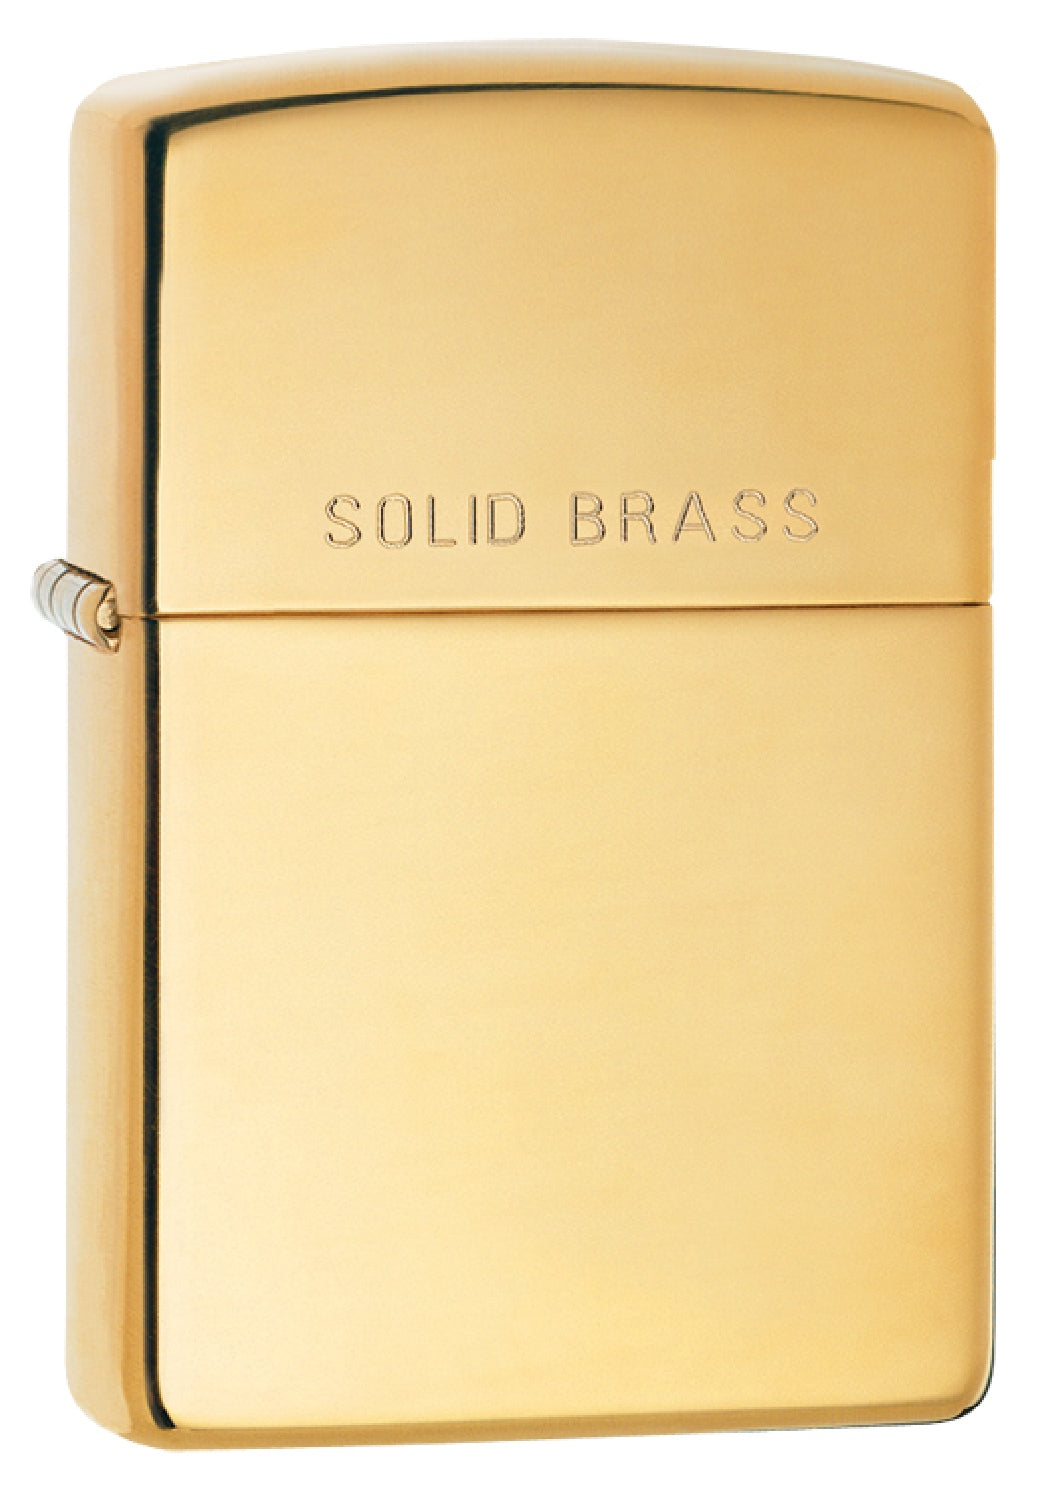 Zippo Classic High Polish Solid Brass Windproof Flame Lighter